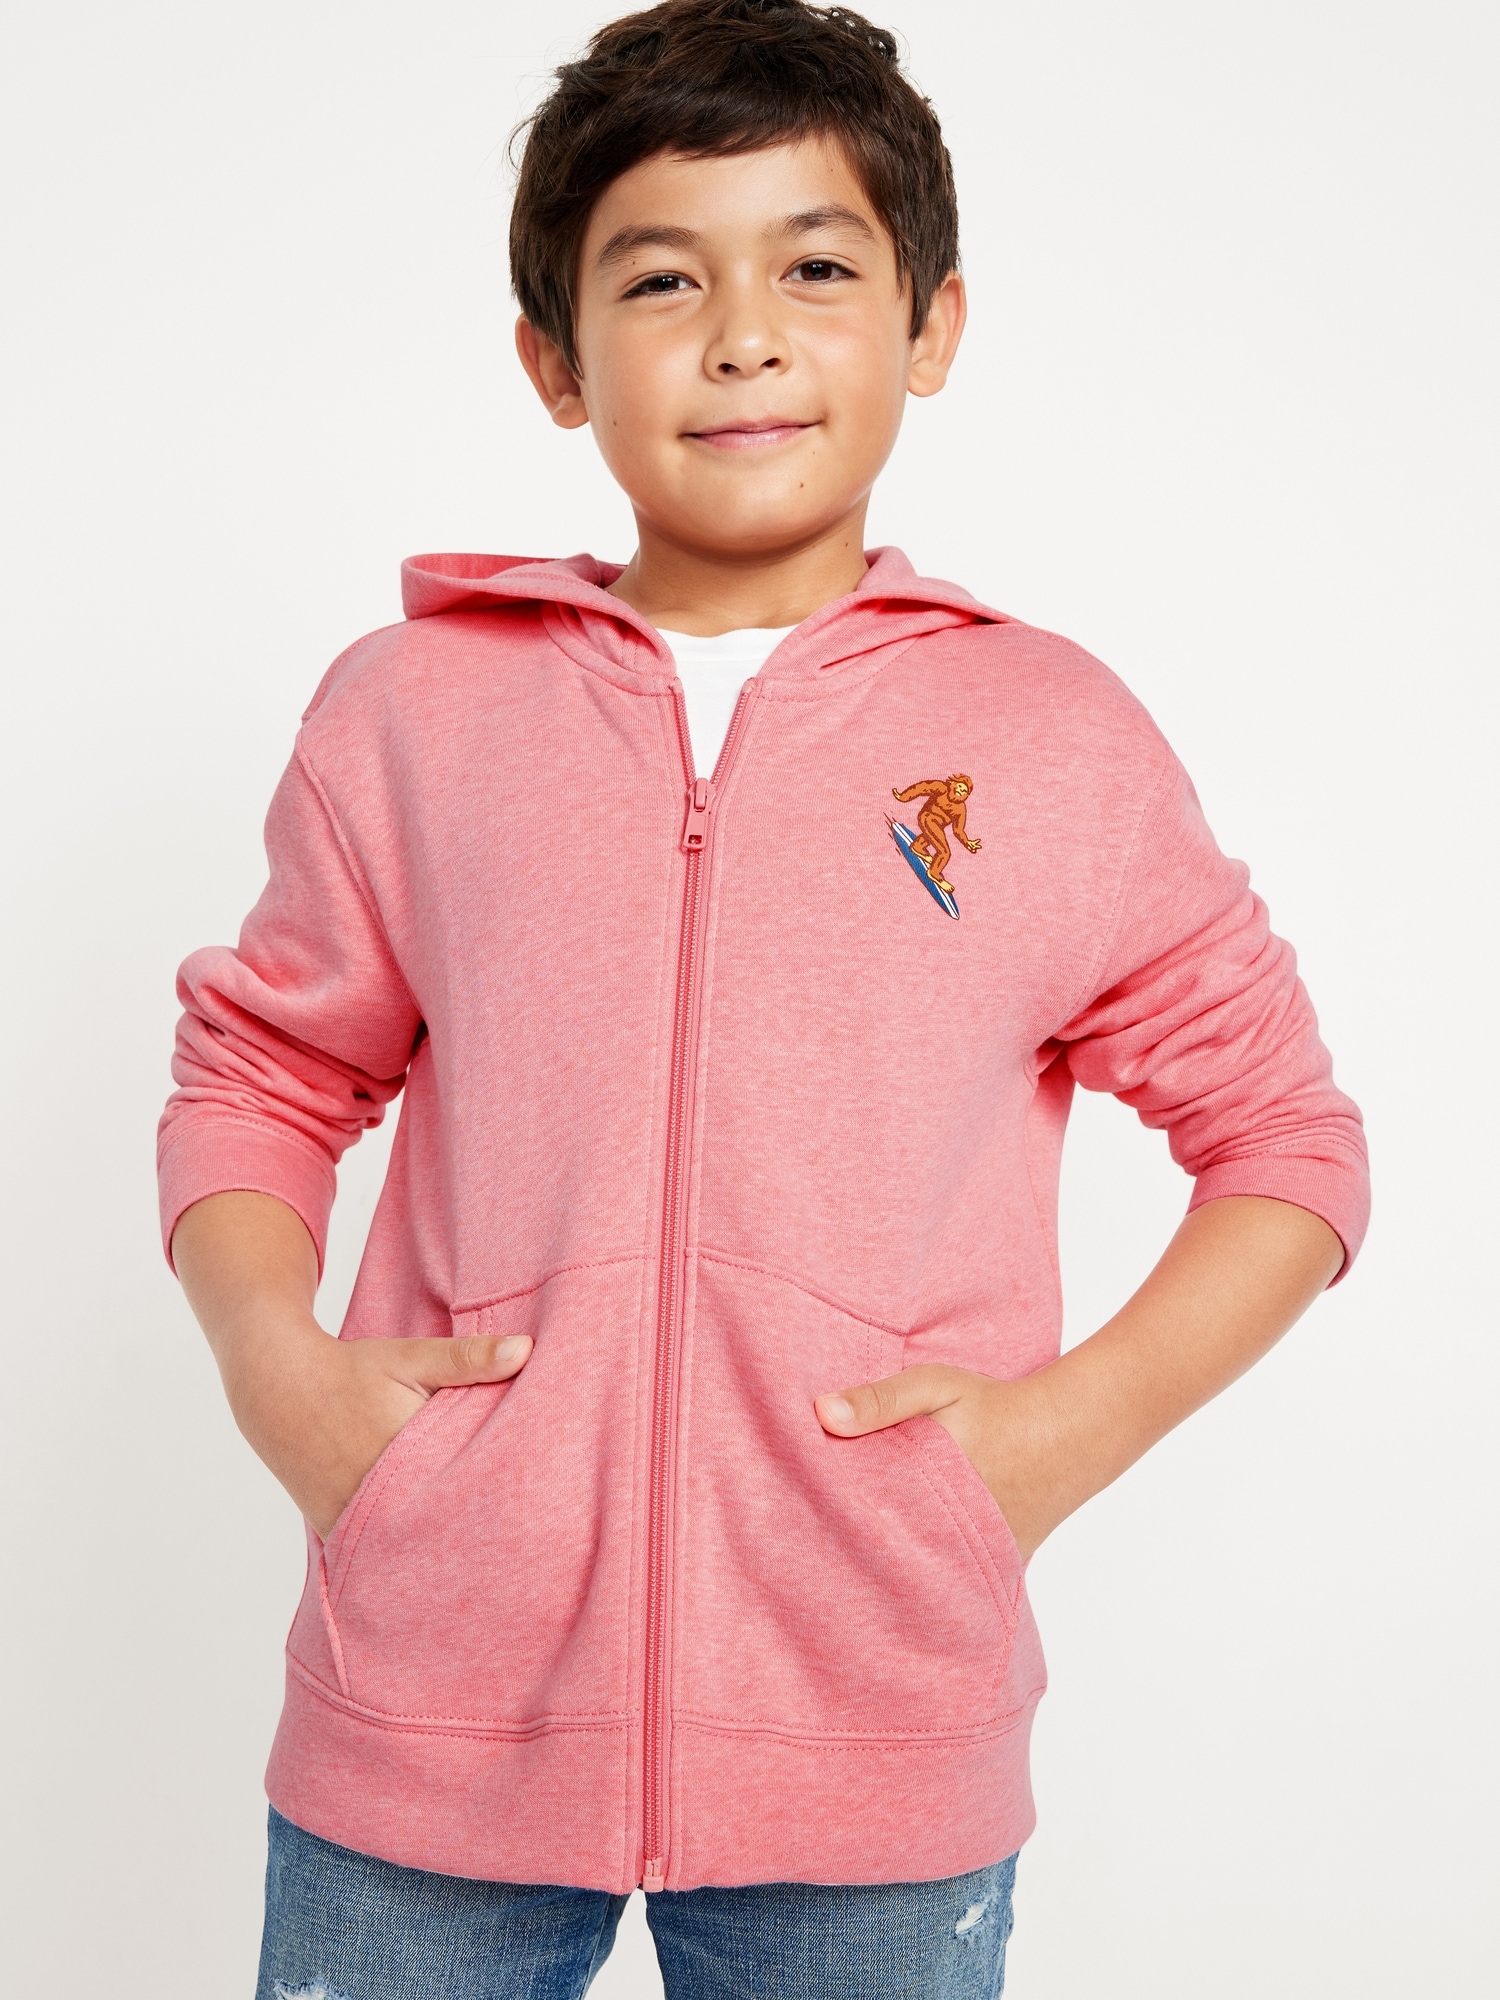 Graphic Zip-Front Hoodie for Boys Hot Deal